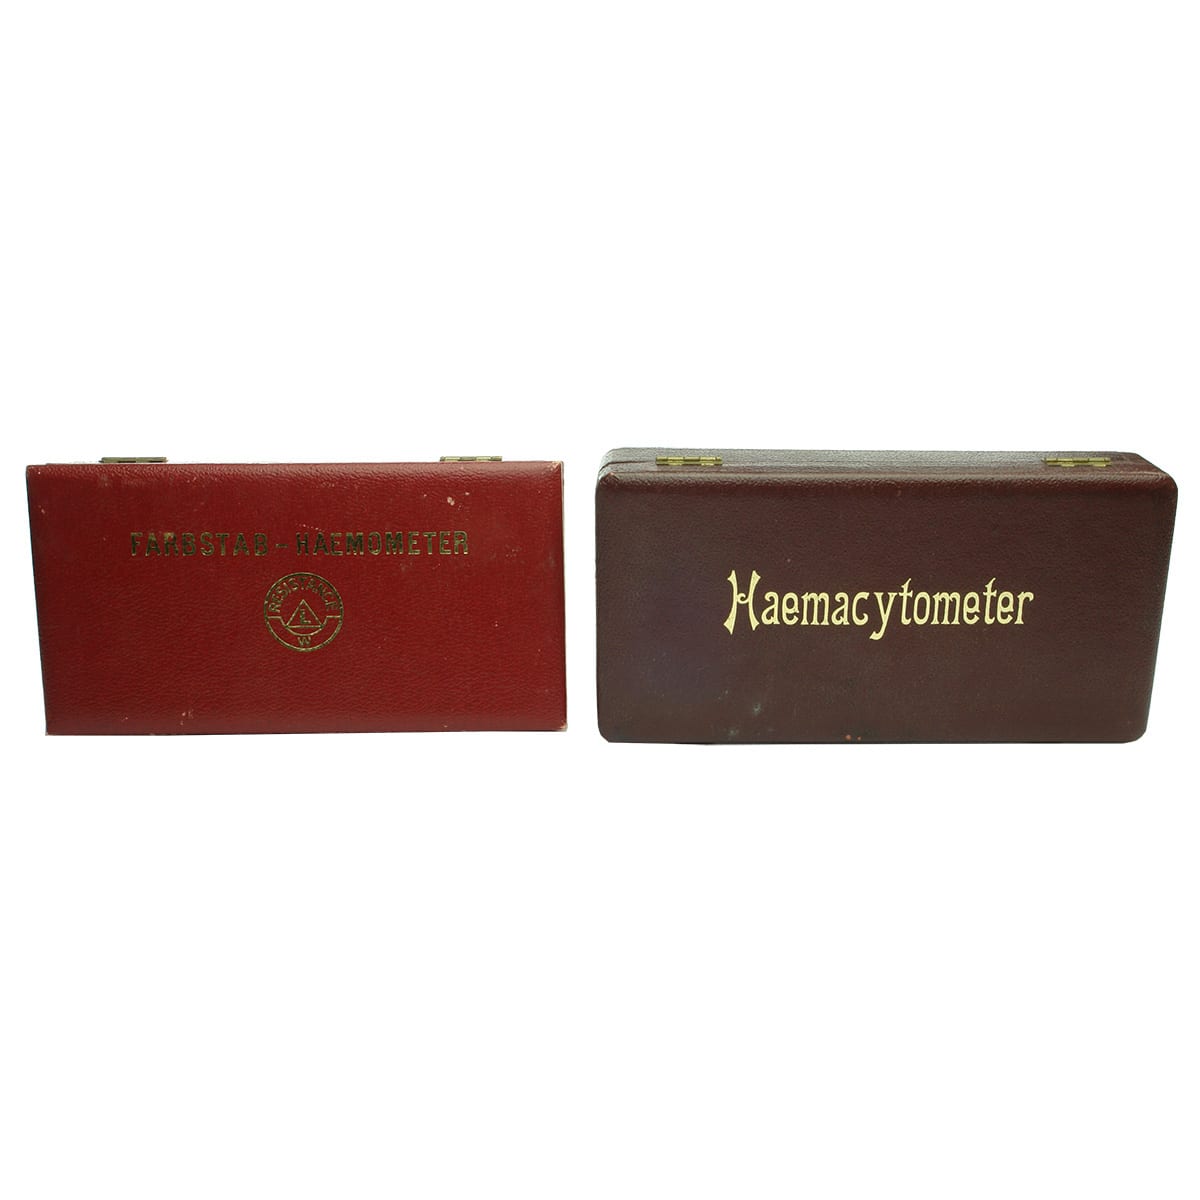 Pair of Boxed Medical Instruments: Haemacytometer and Farbstab-Haemometer.